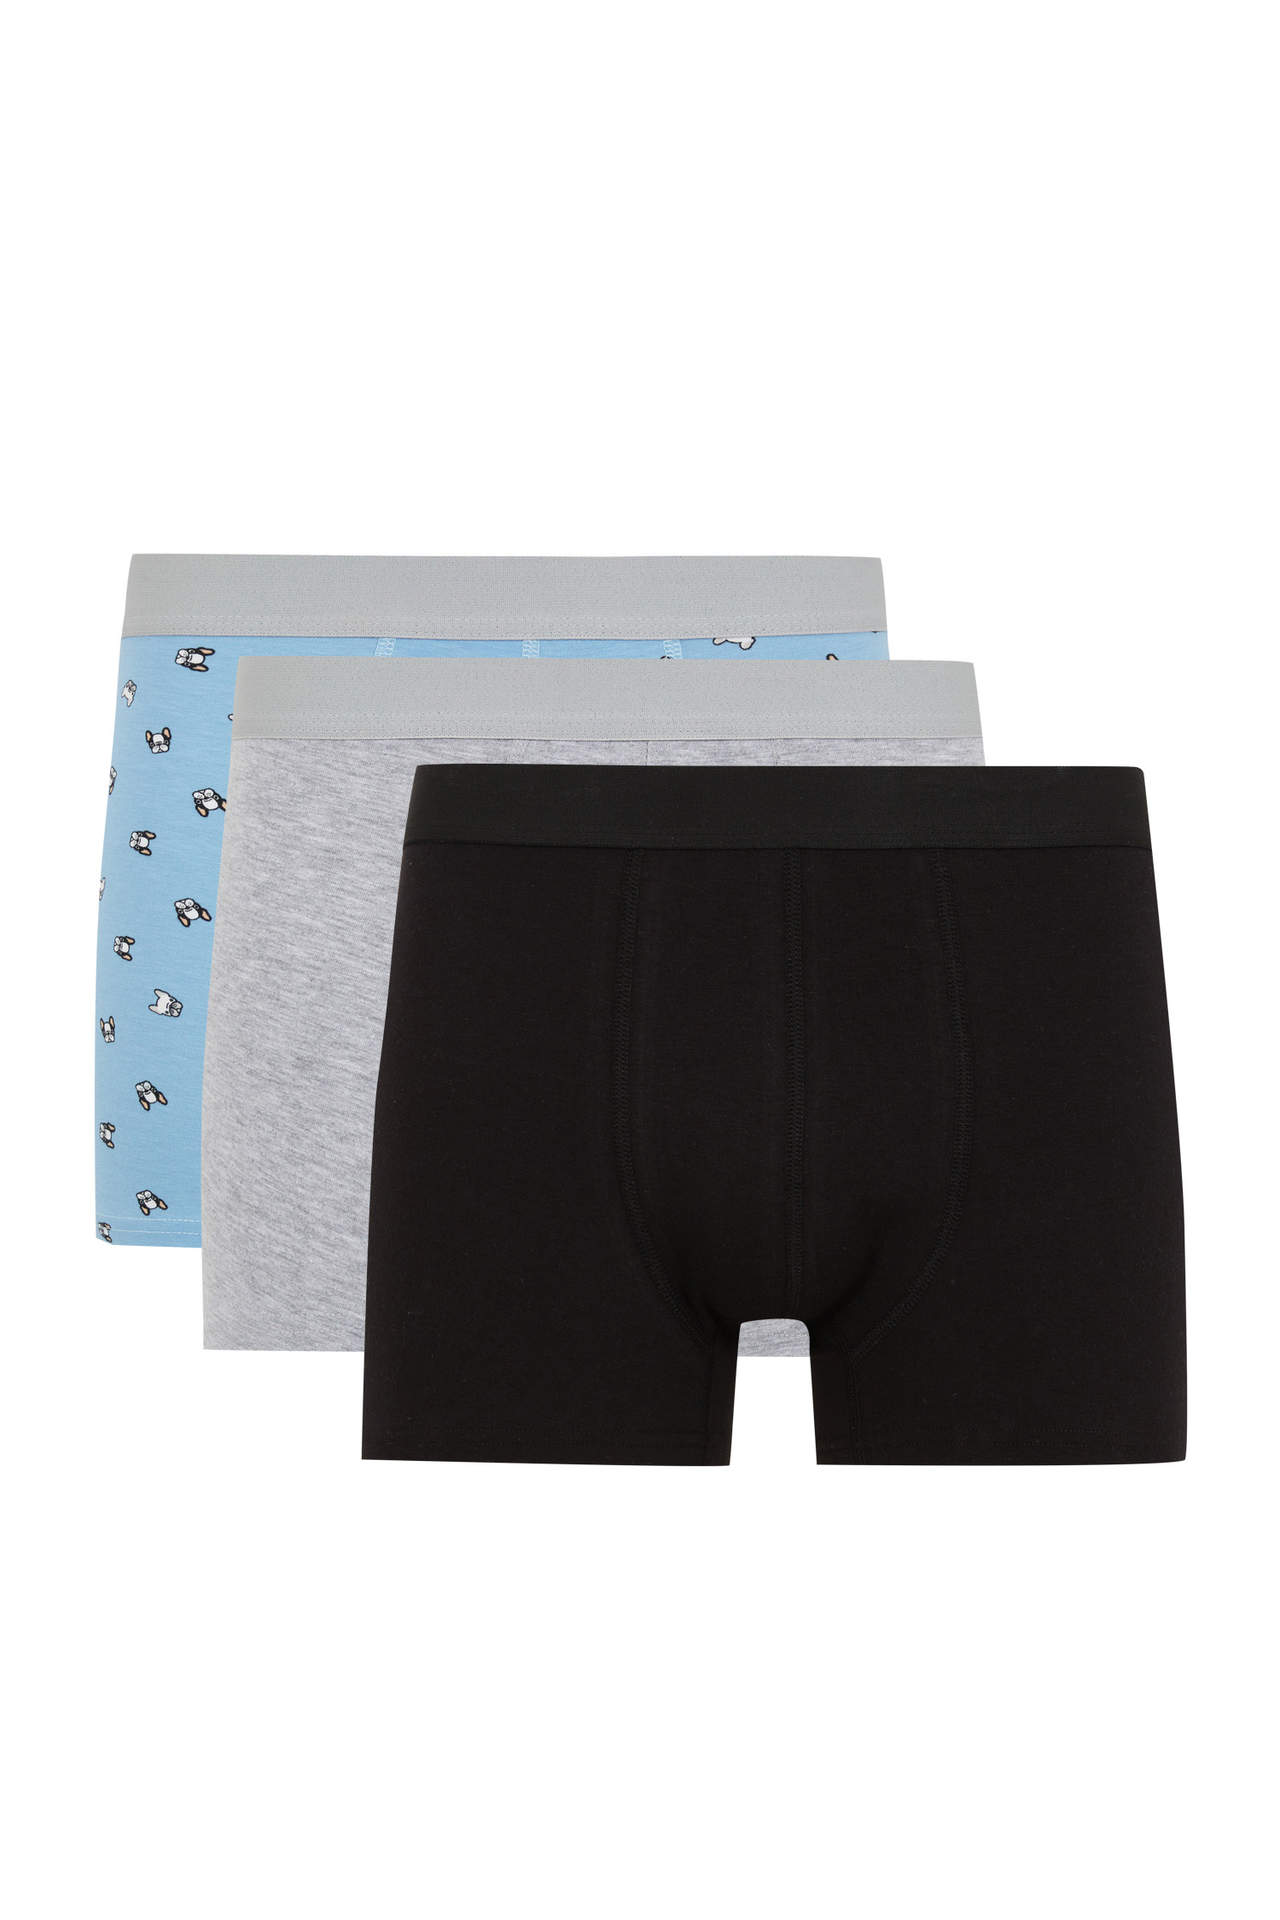 DEFACTO 3 Piece Regular Fit Knitted Boxer